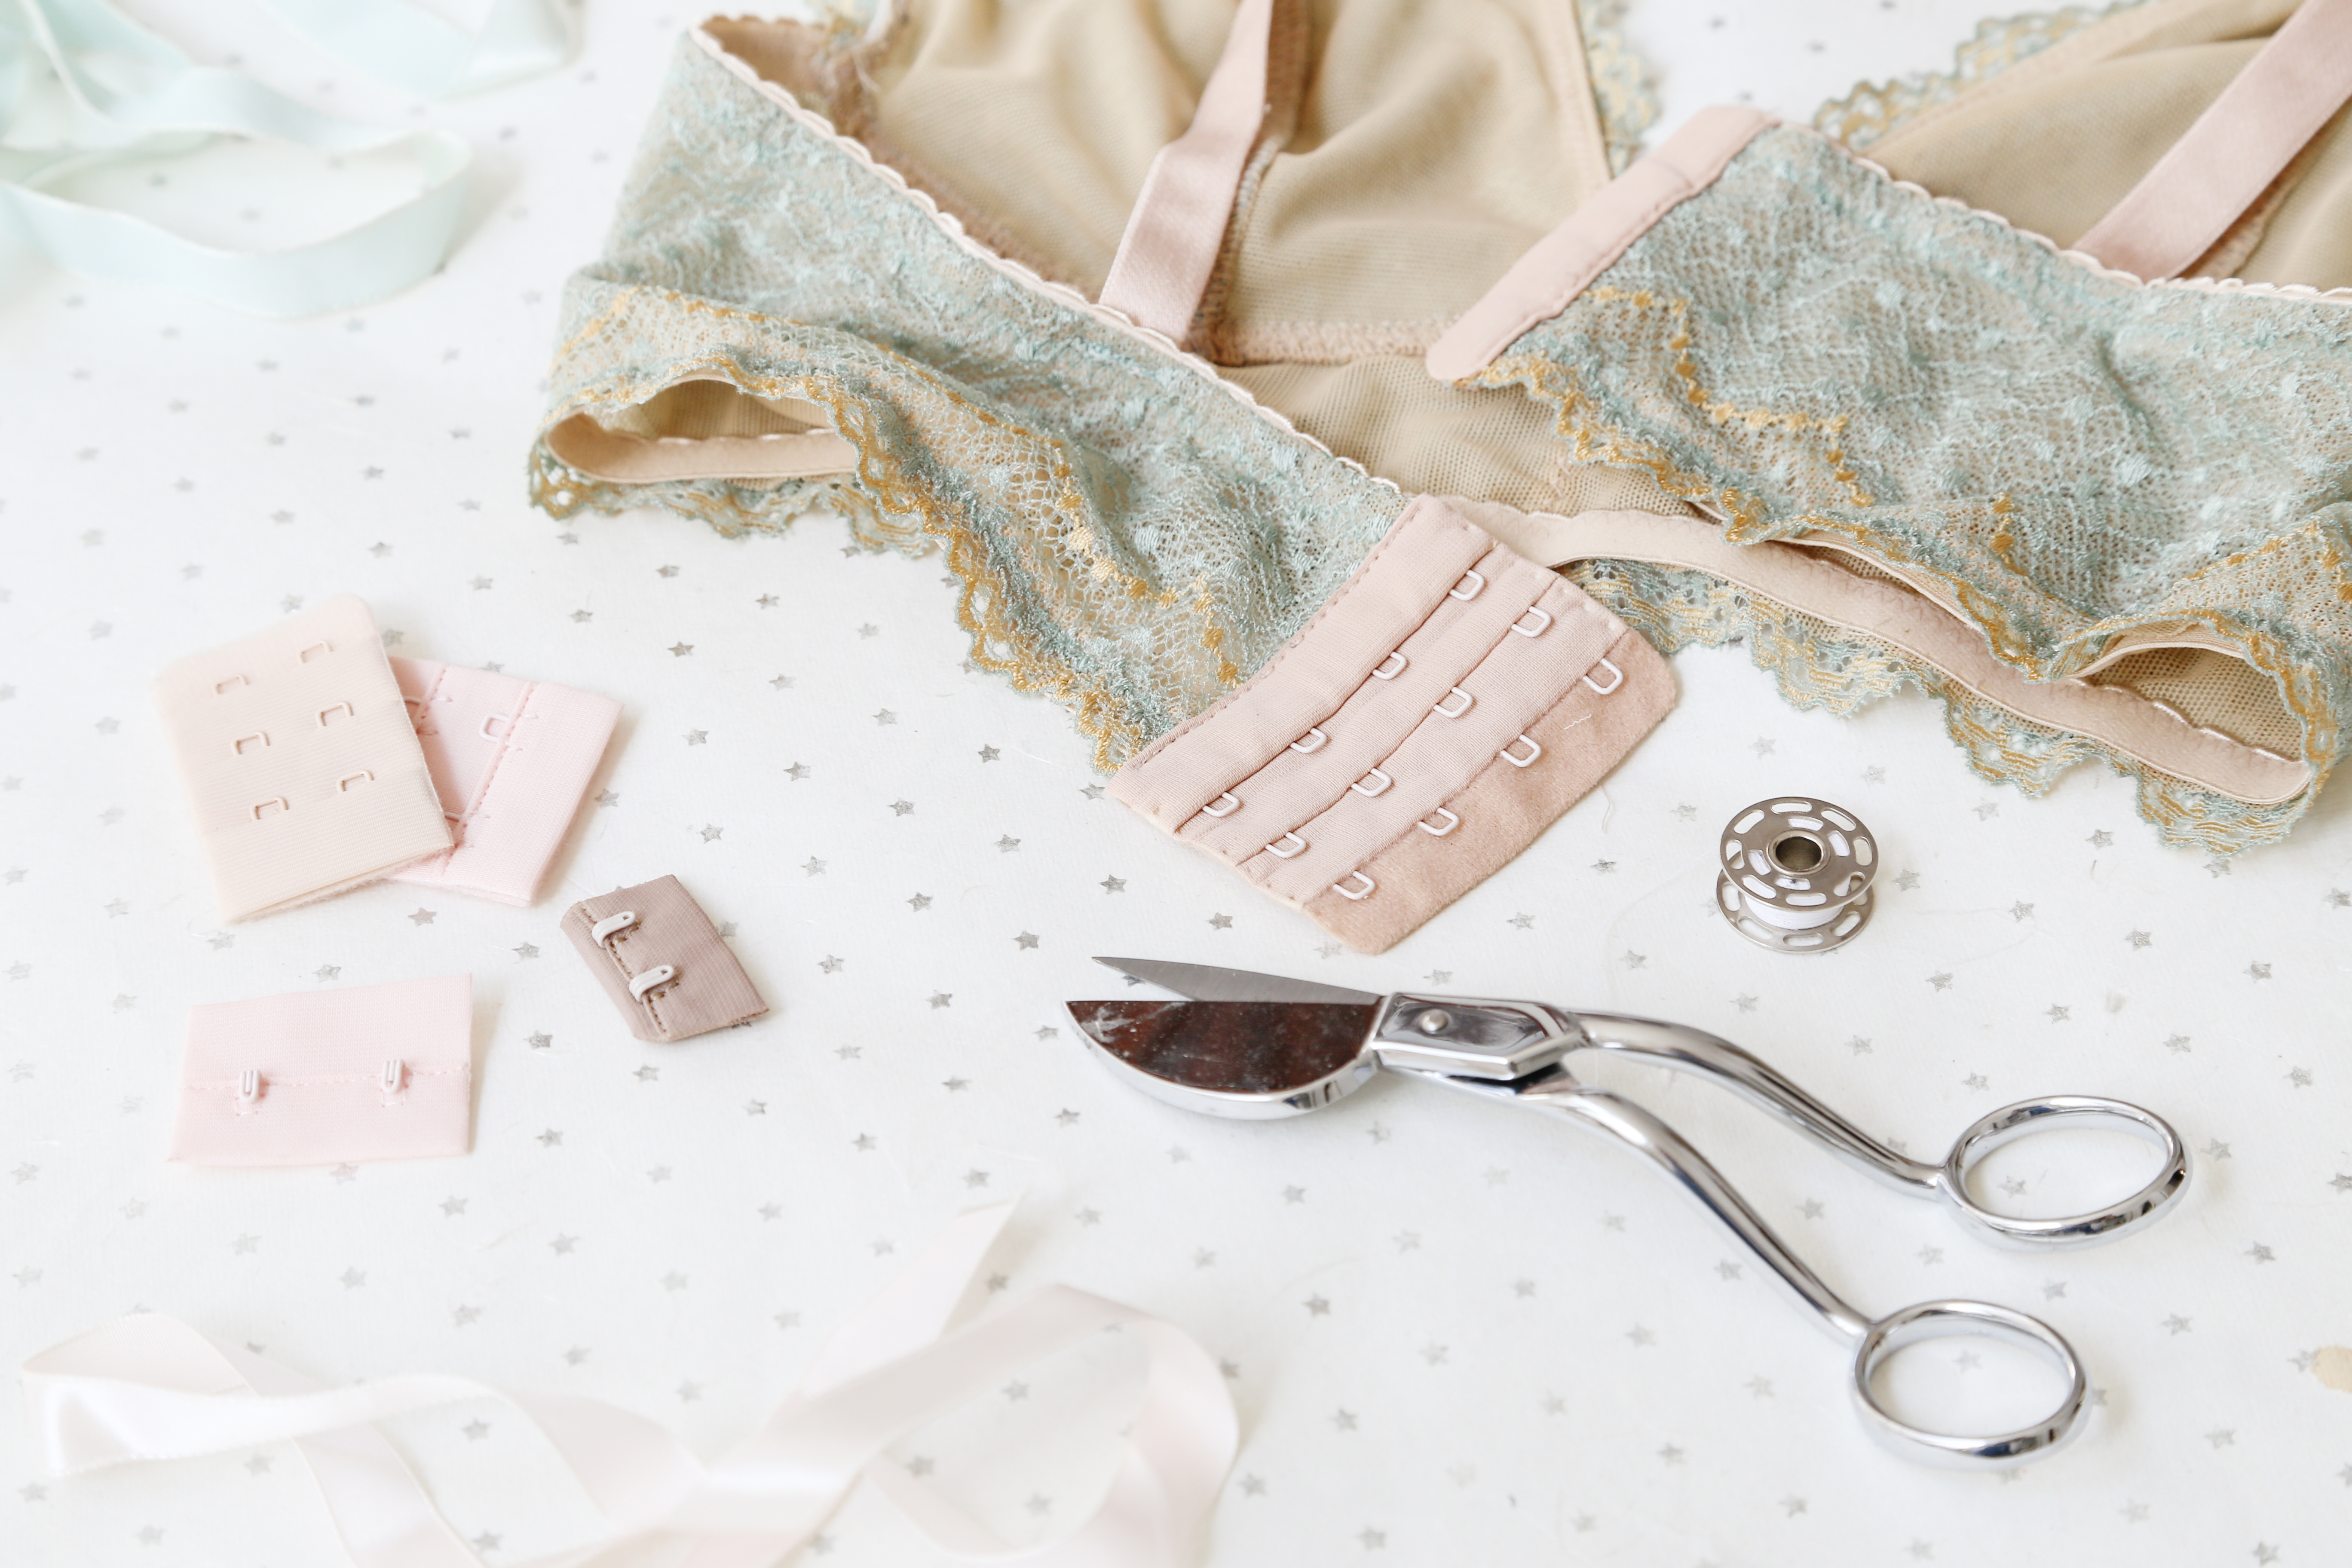 Bra Making: How To Sew A Hook and Eye - WeAllSew